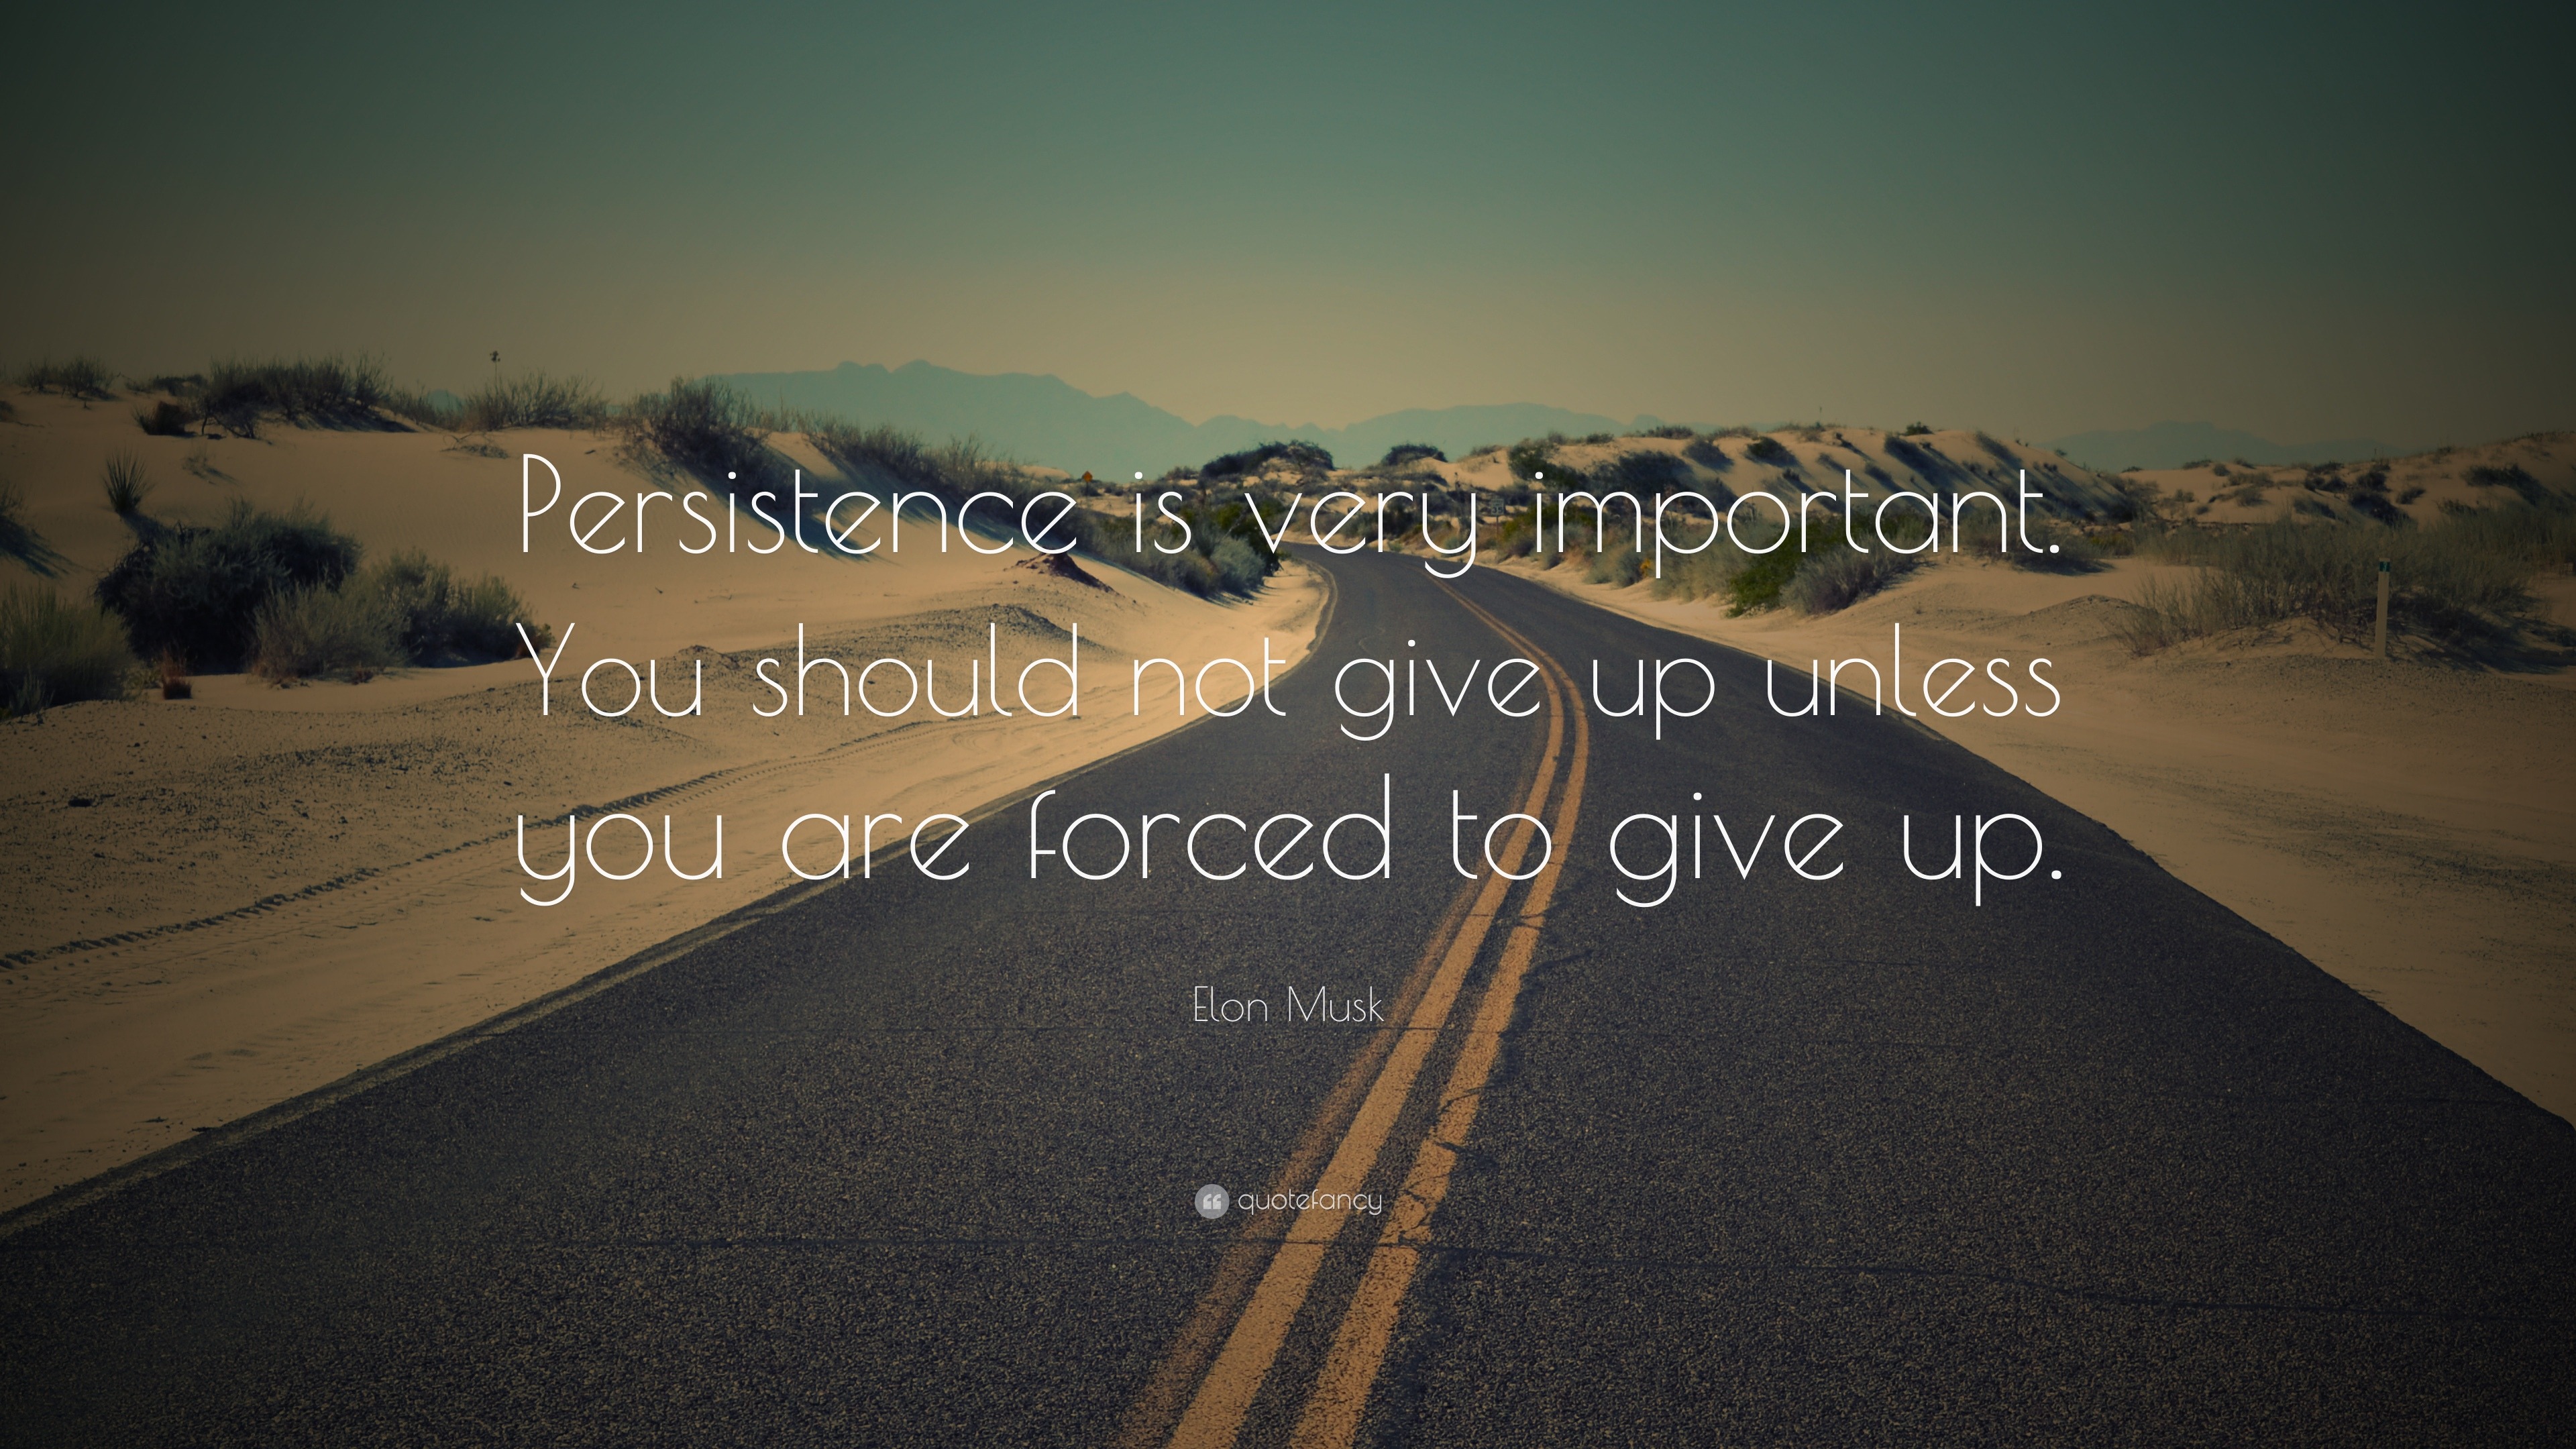 Persistence Quotes (50 wallpapers) - Quotefancy